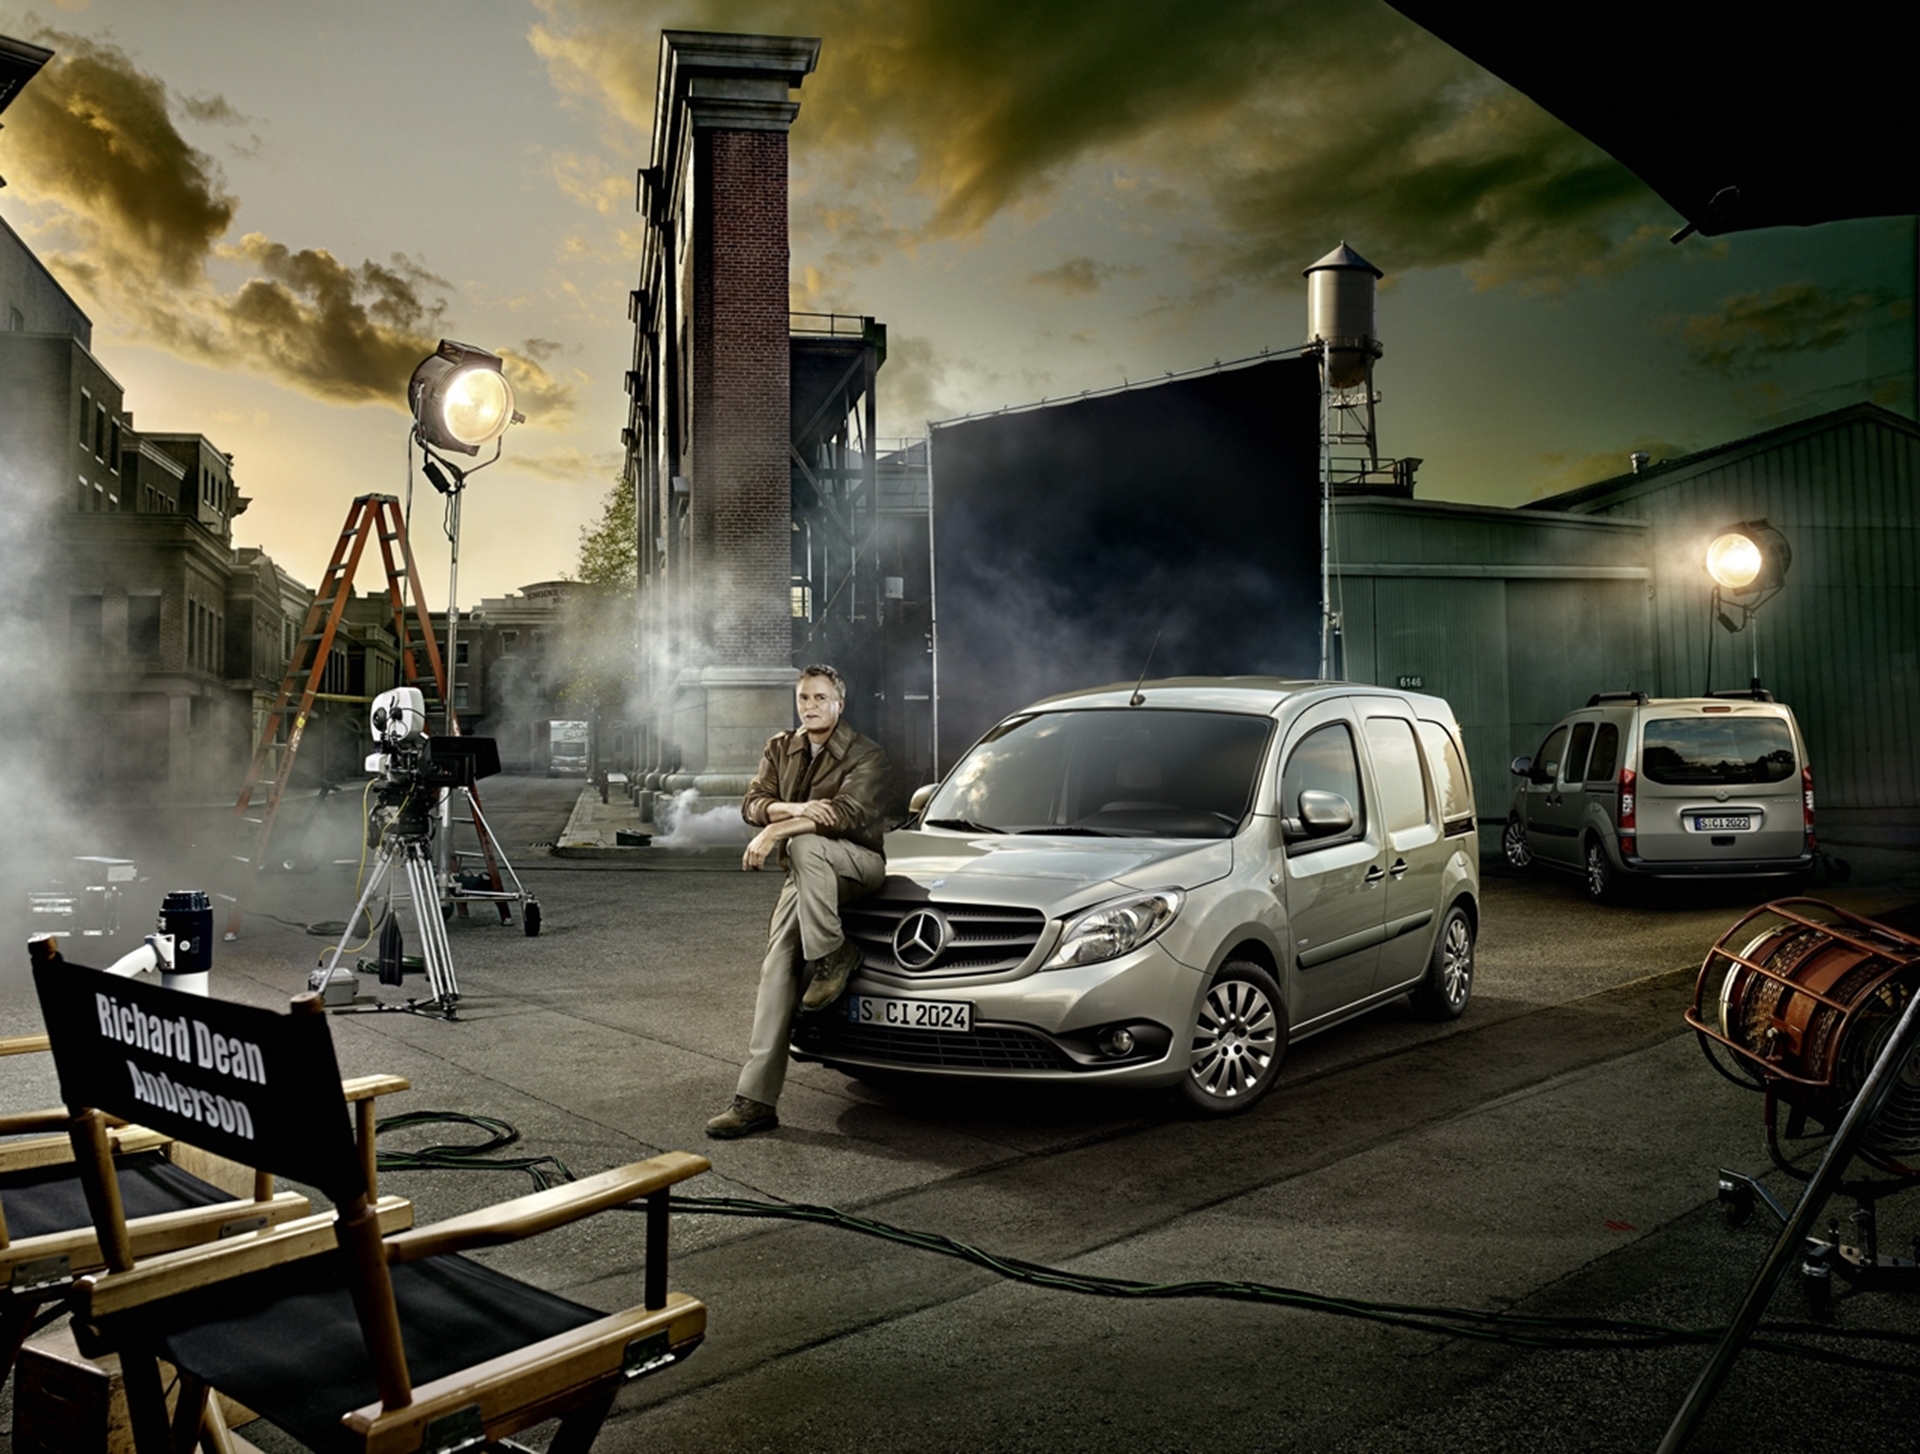 MacGyver and the new Citan: every hero needs a strong partner